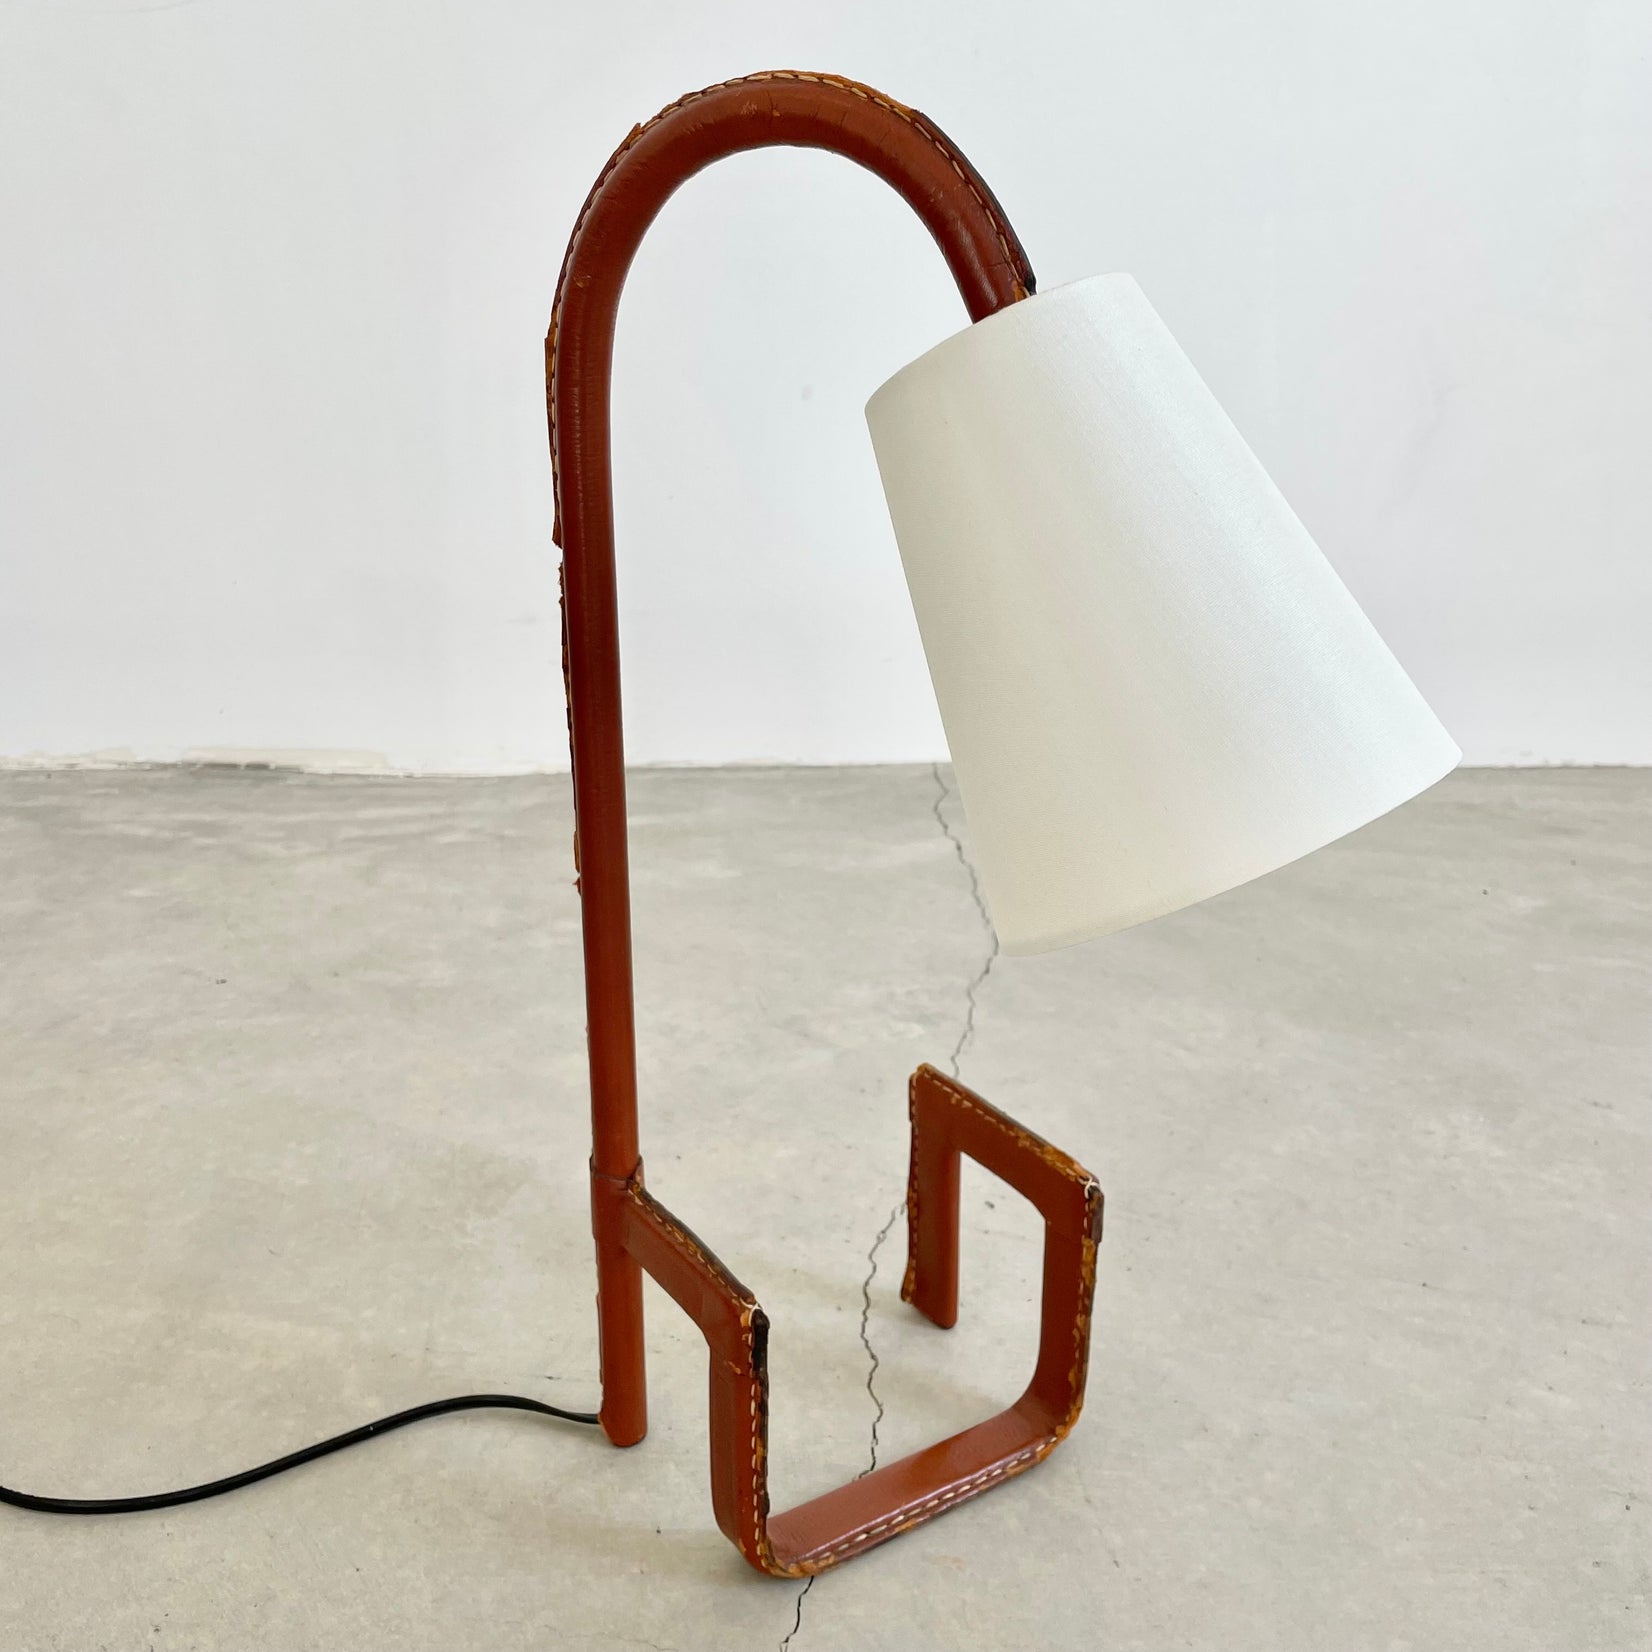 Jacques Adnet Leather Table Lamp and Letter Holder, 1950s France